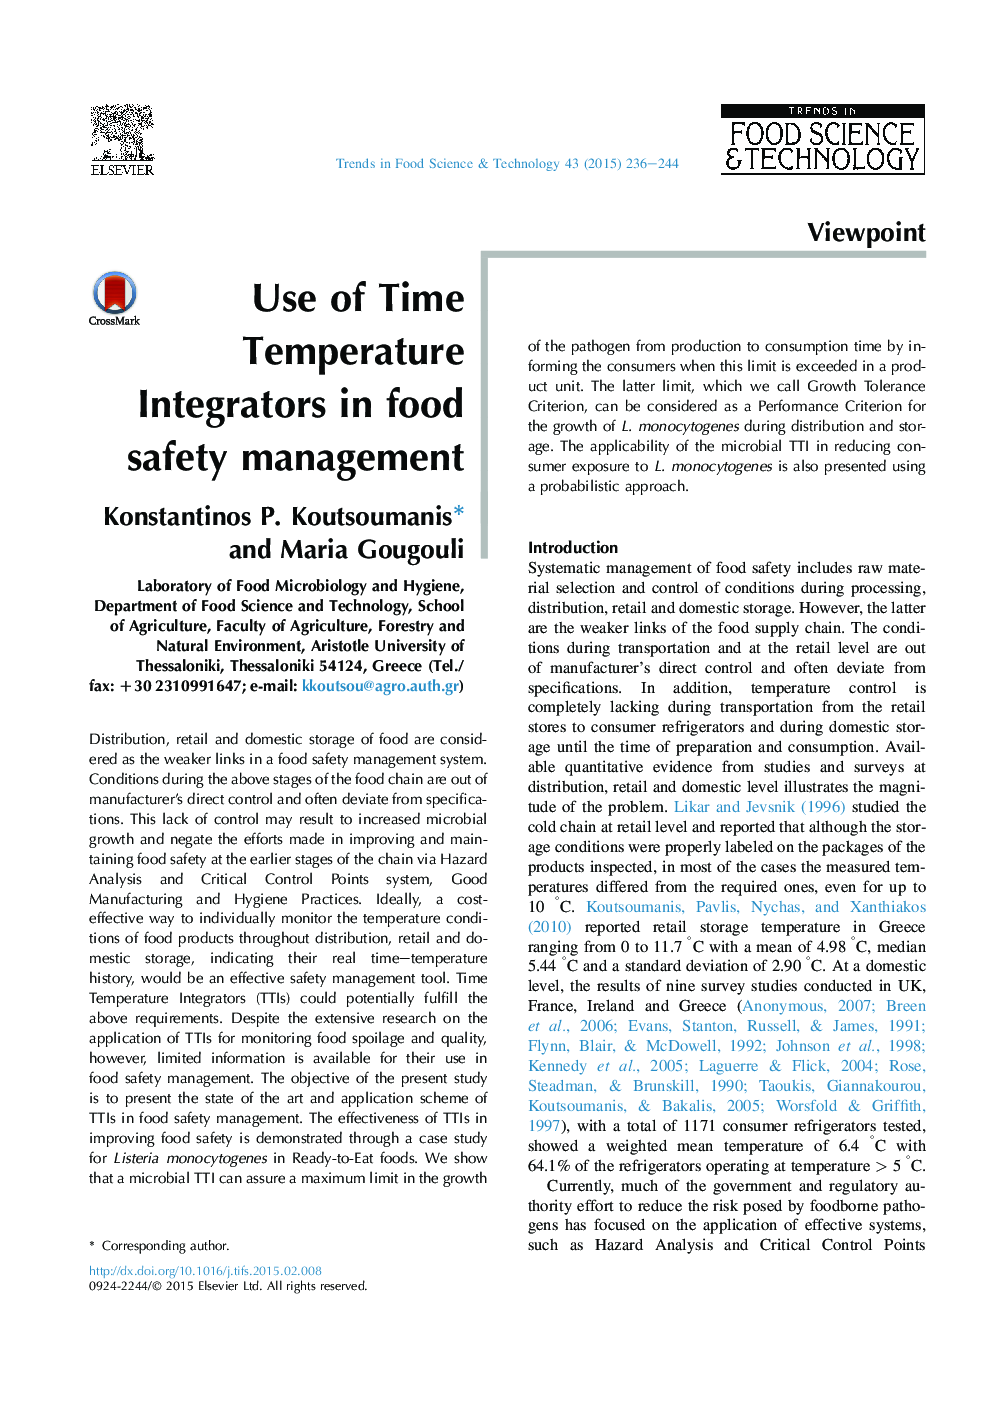 Use of Time Temperature Integrators in food safety management